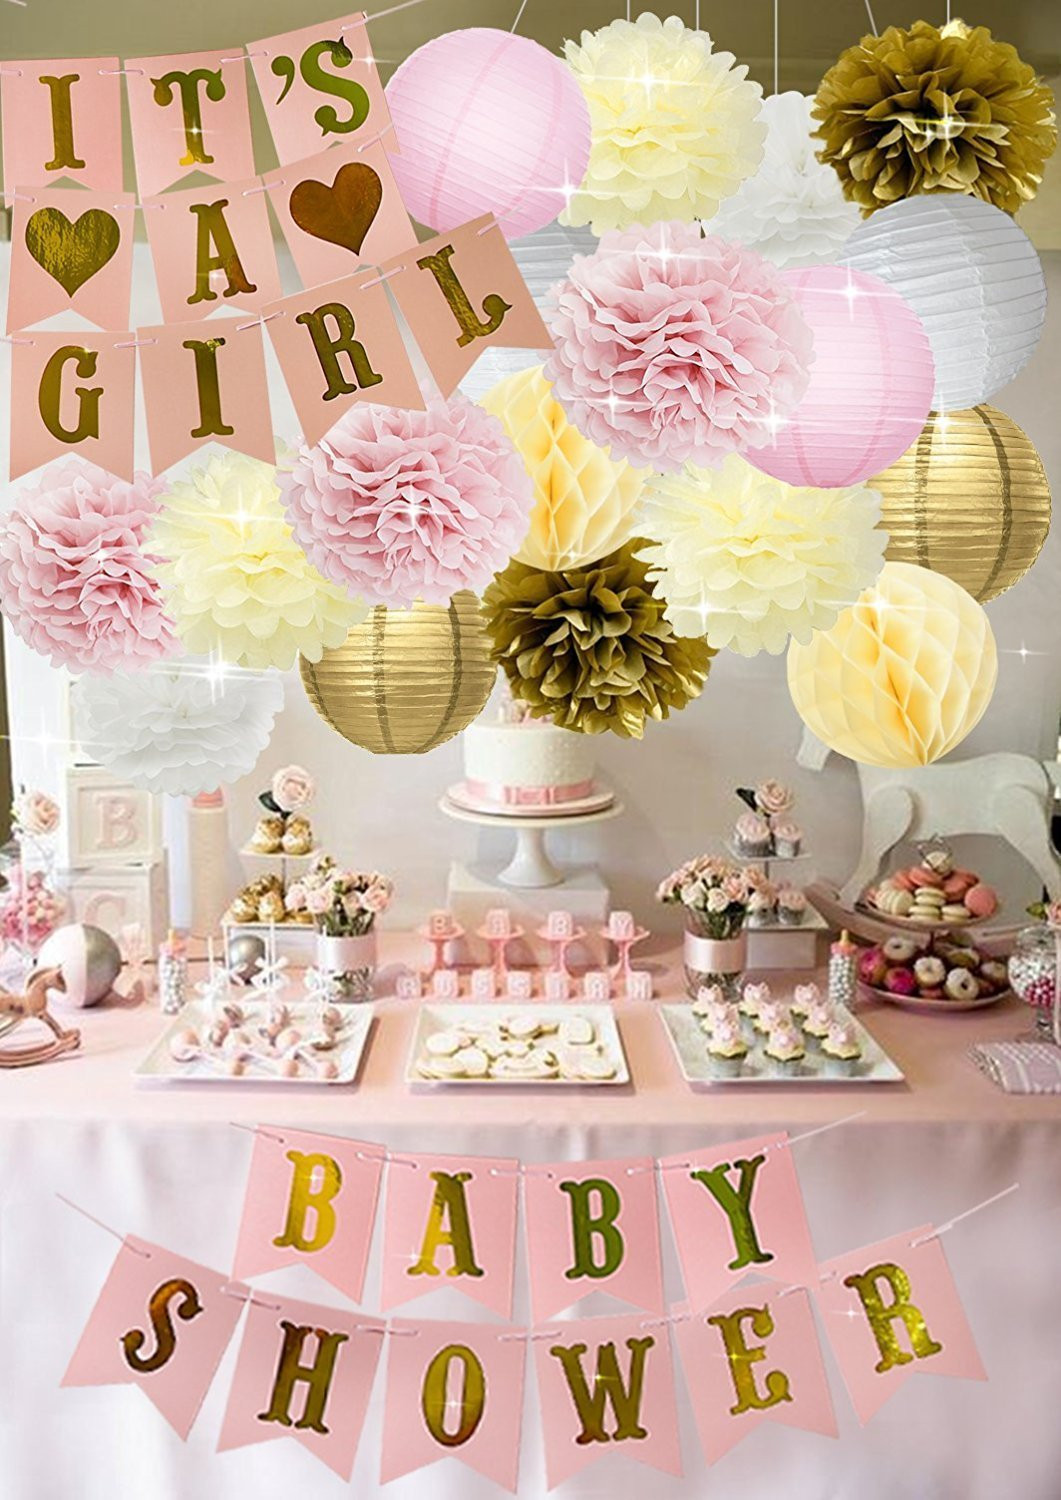 Baby Shower Decoration Ideas For Girl
 Baby Shower Decorations BABY SHOWER IT S A GIRL Garland